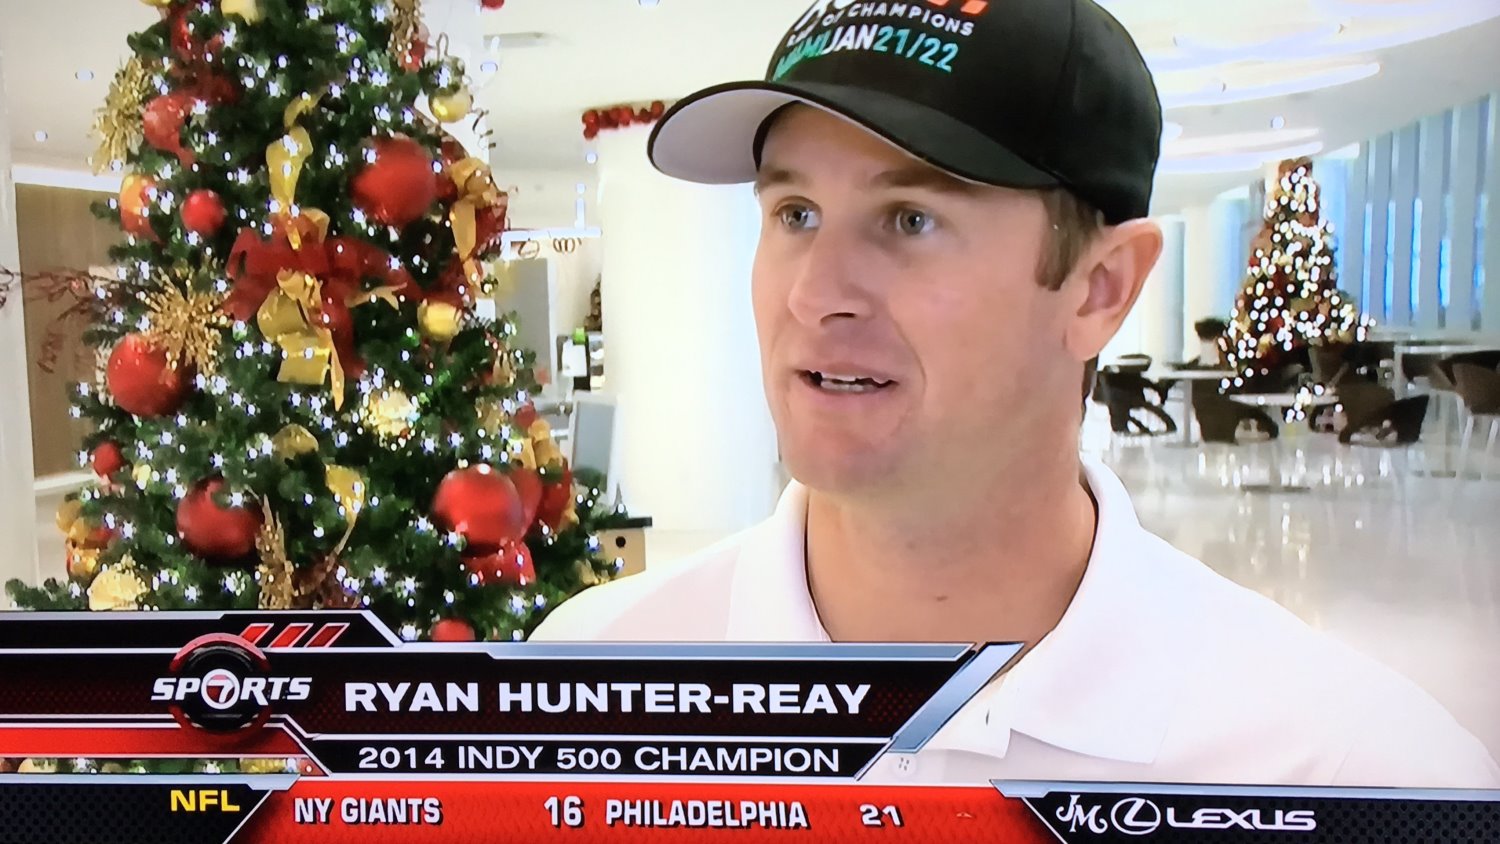 Ryan Hunter-Reay on local TV in Fort Lauderdale